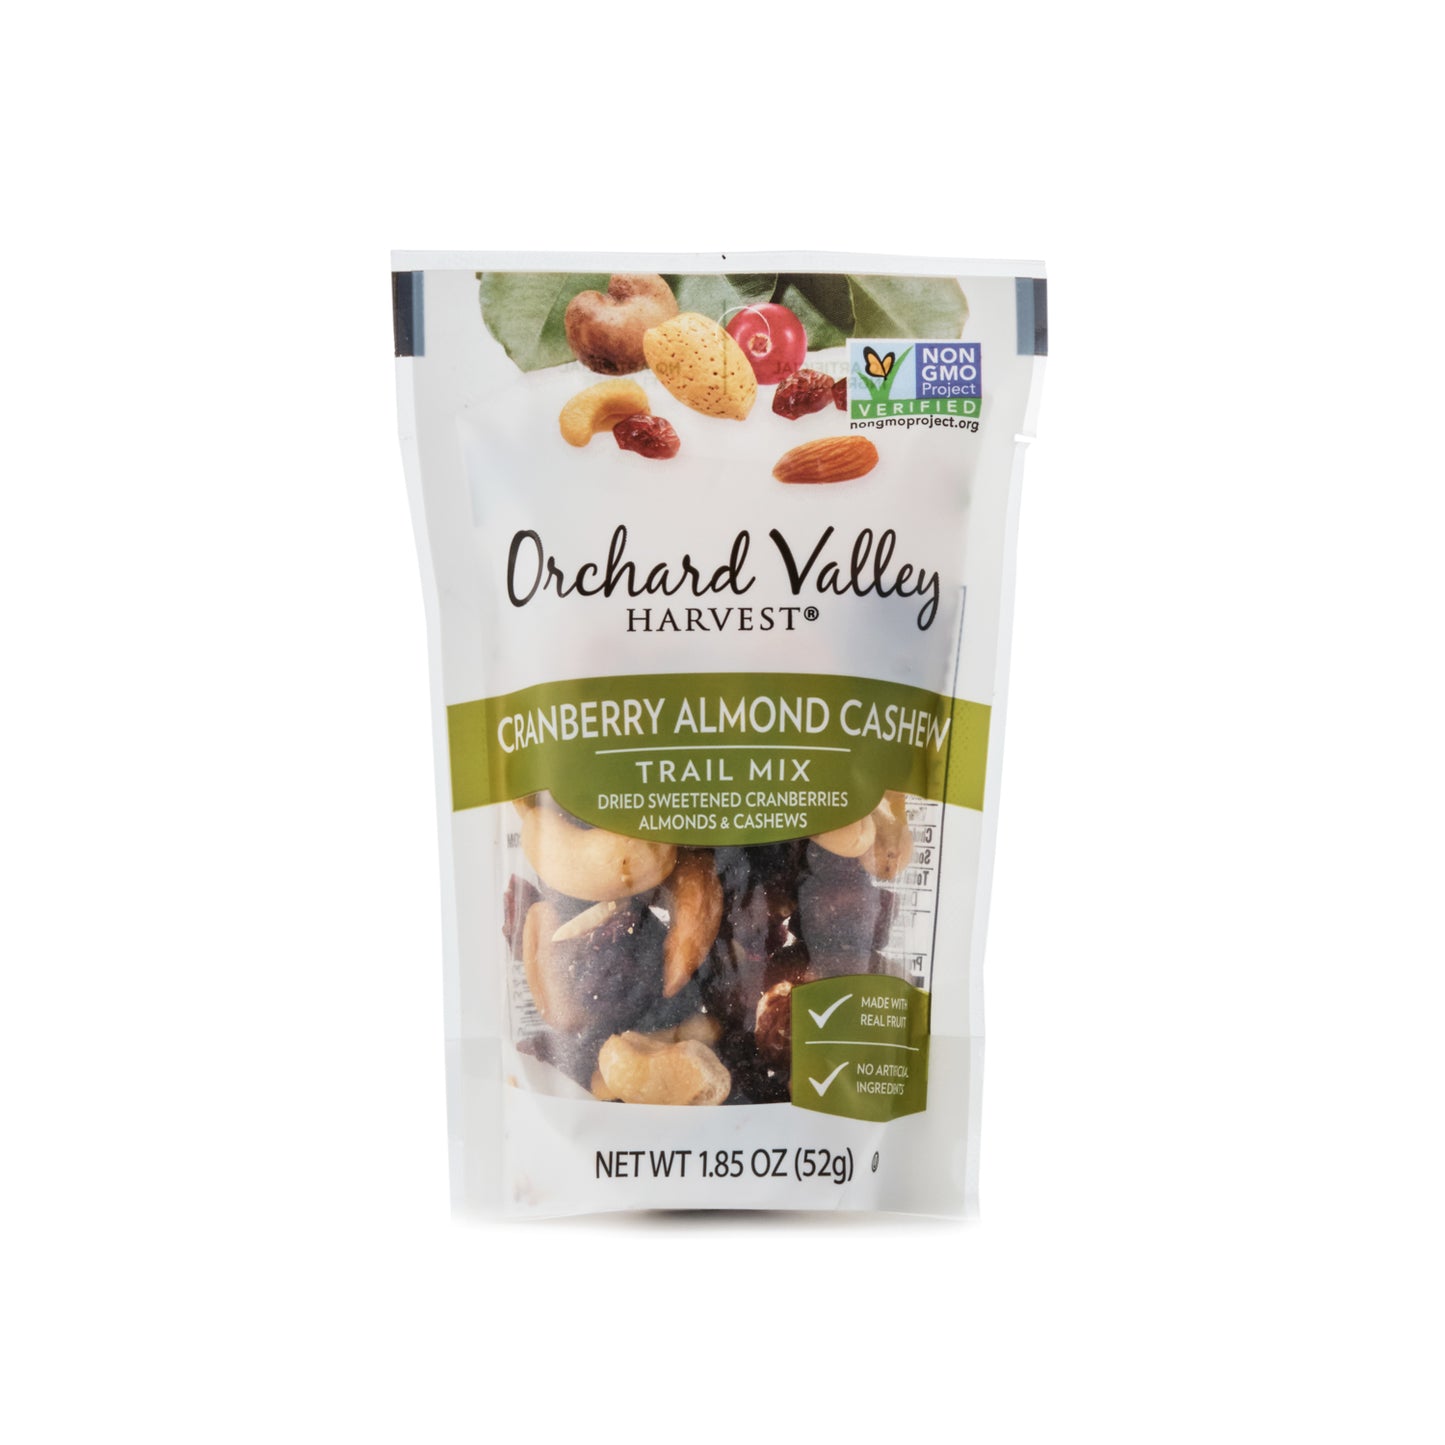 Orchard Valley Cranberry Almond Cashew Trail Mix 52g